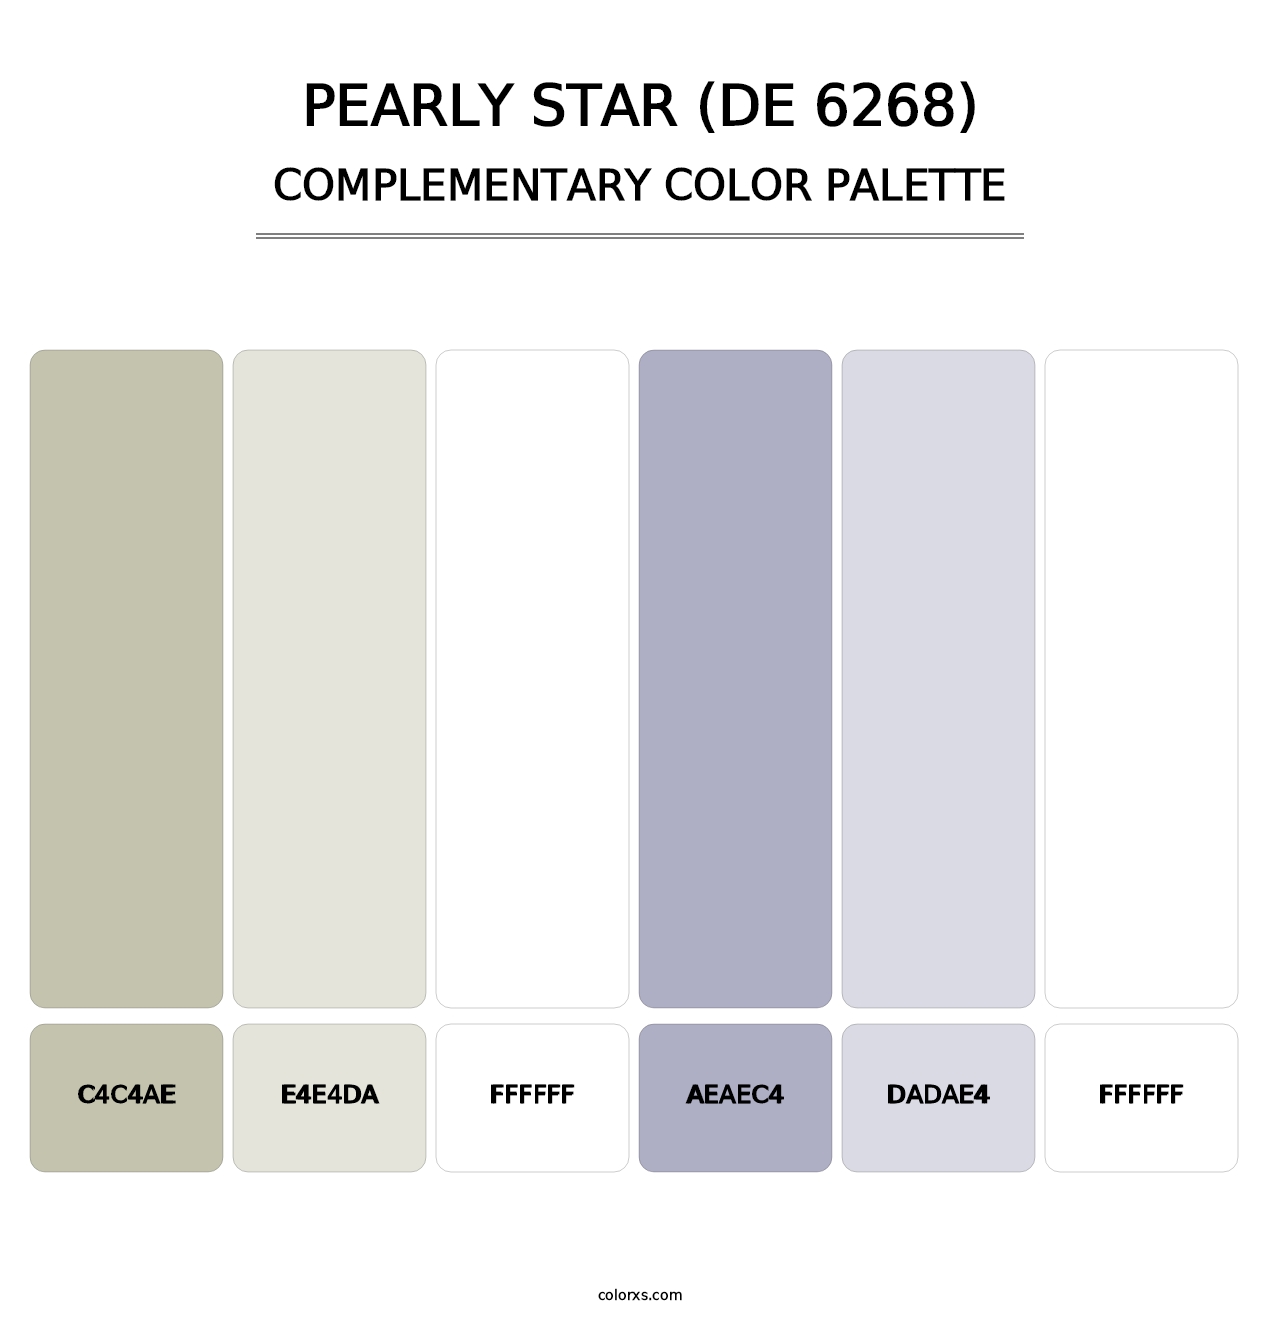 Pearly Star (DE 6268) - Complementary Color Palette